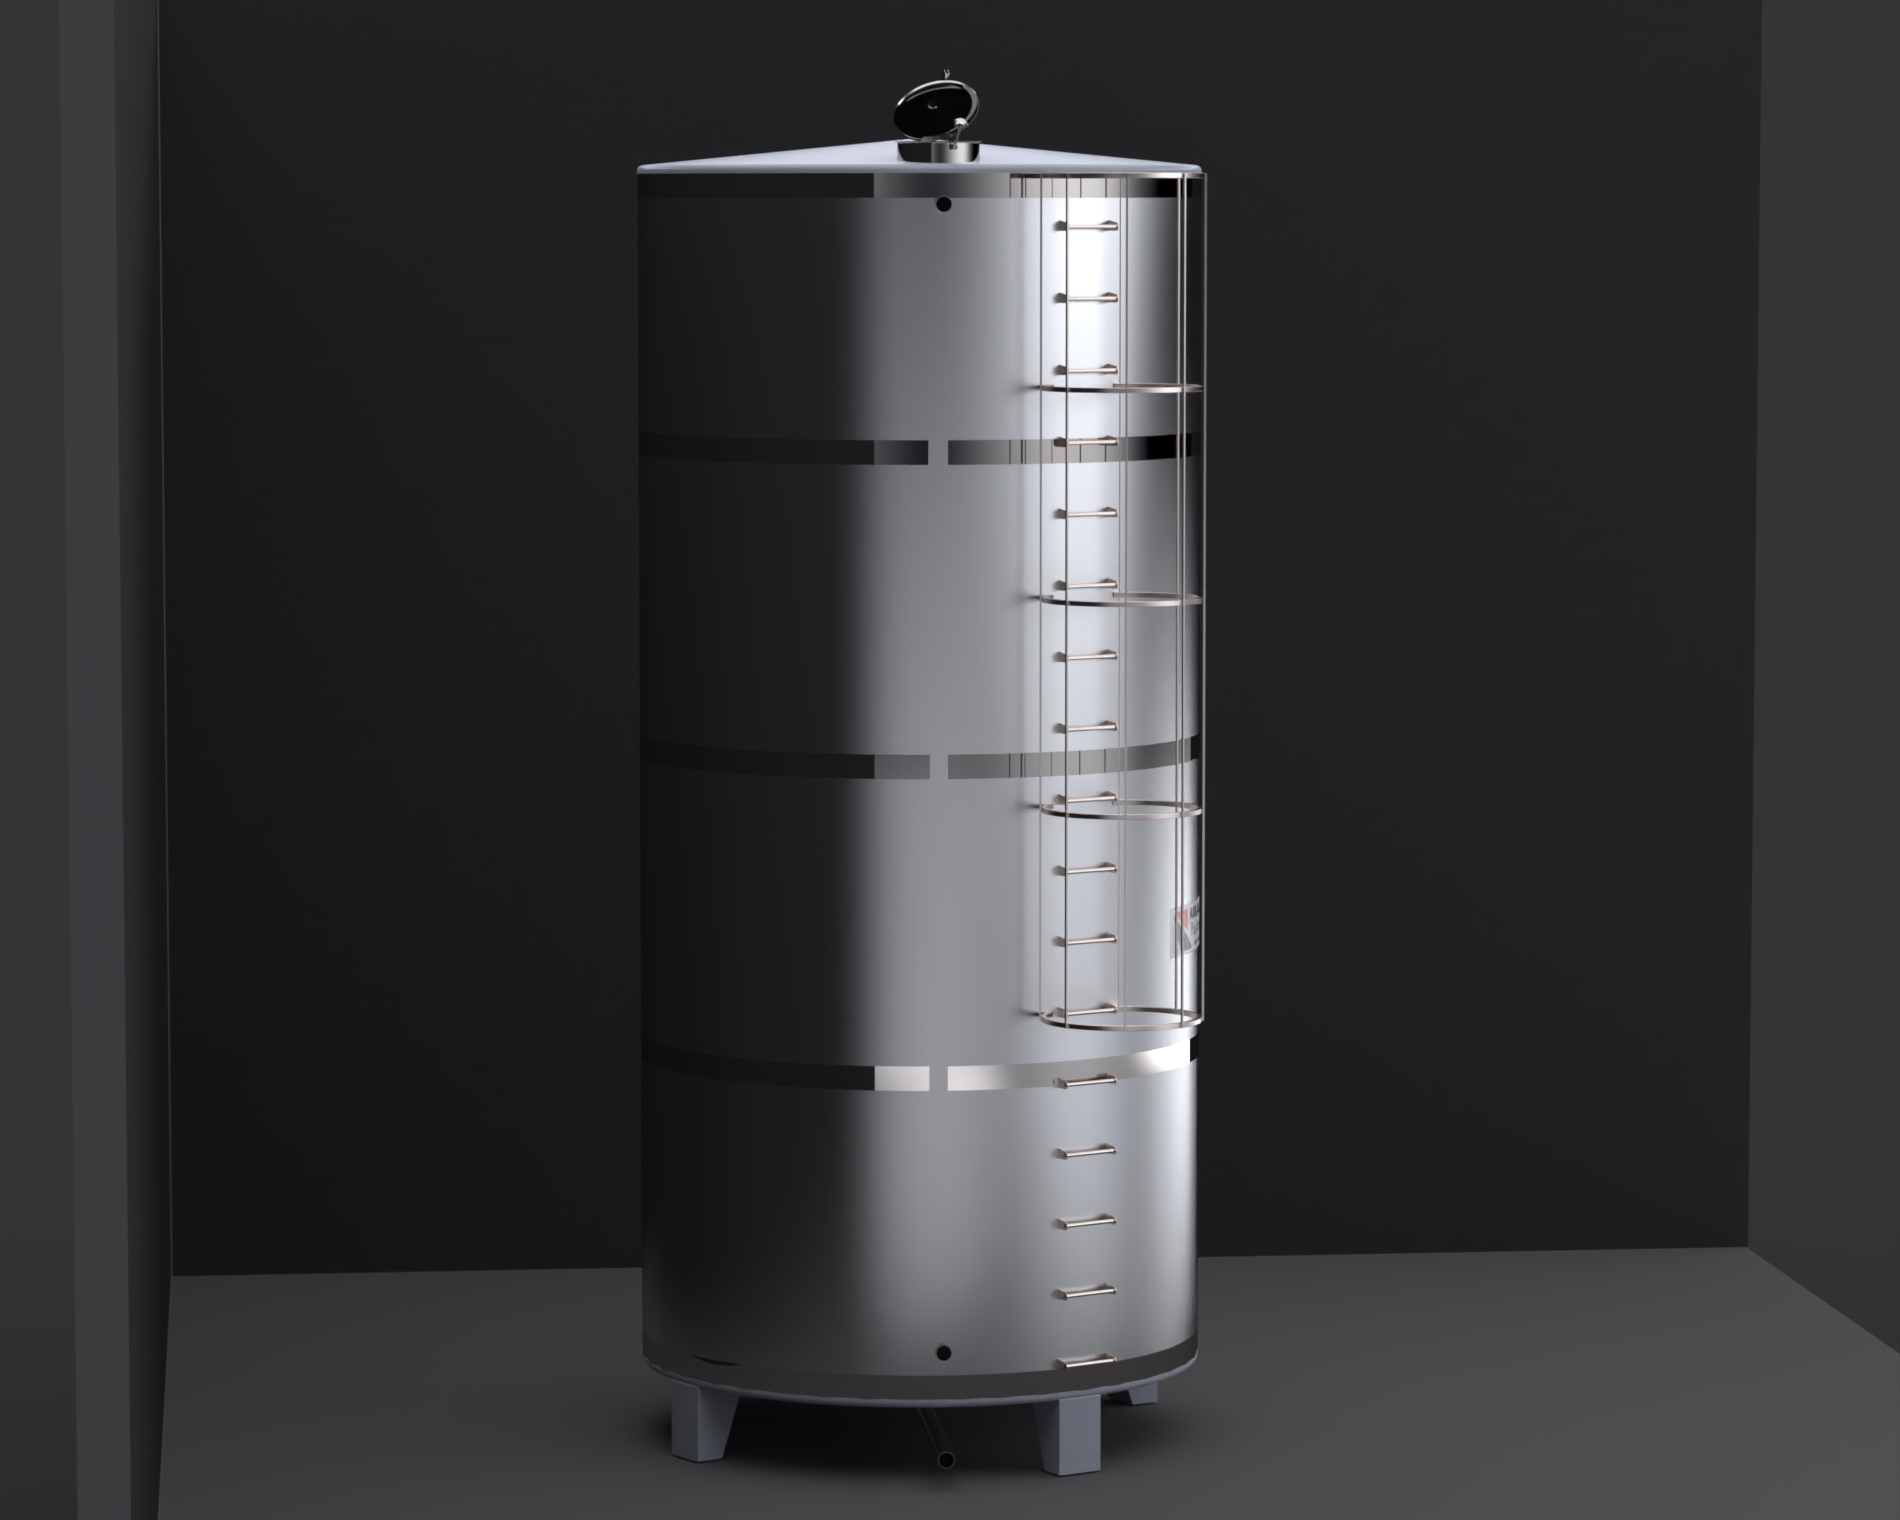 Stainless steel tanks are more commonly used as water tanks due to their durability and other features.